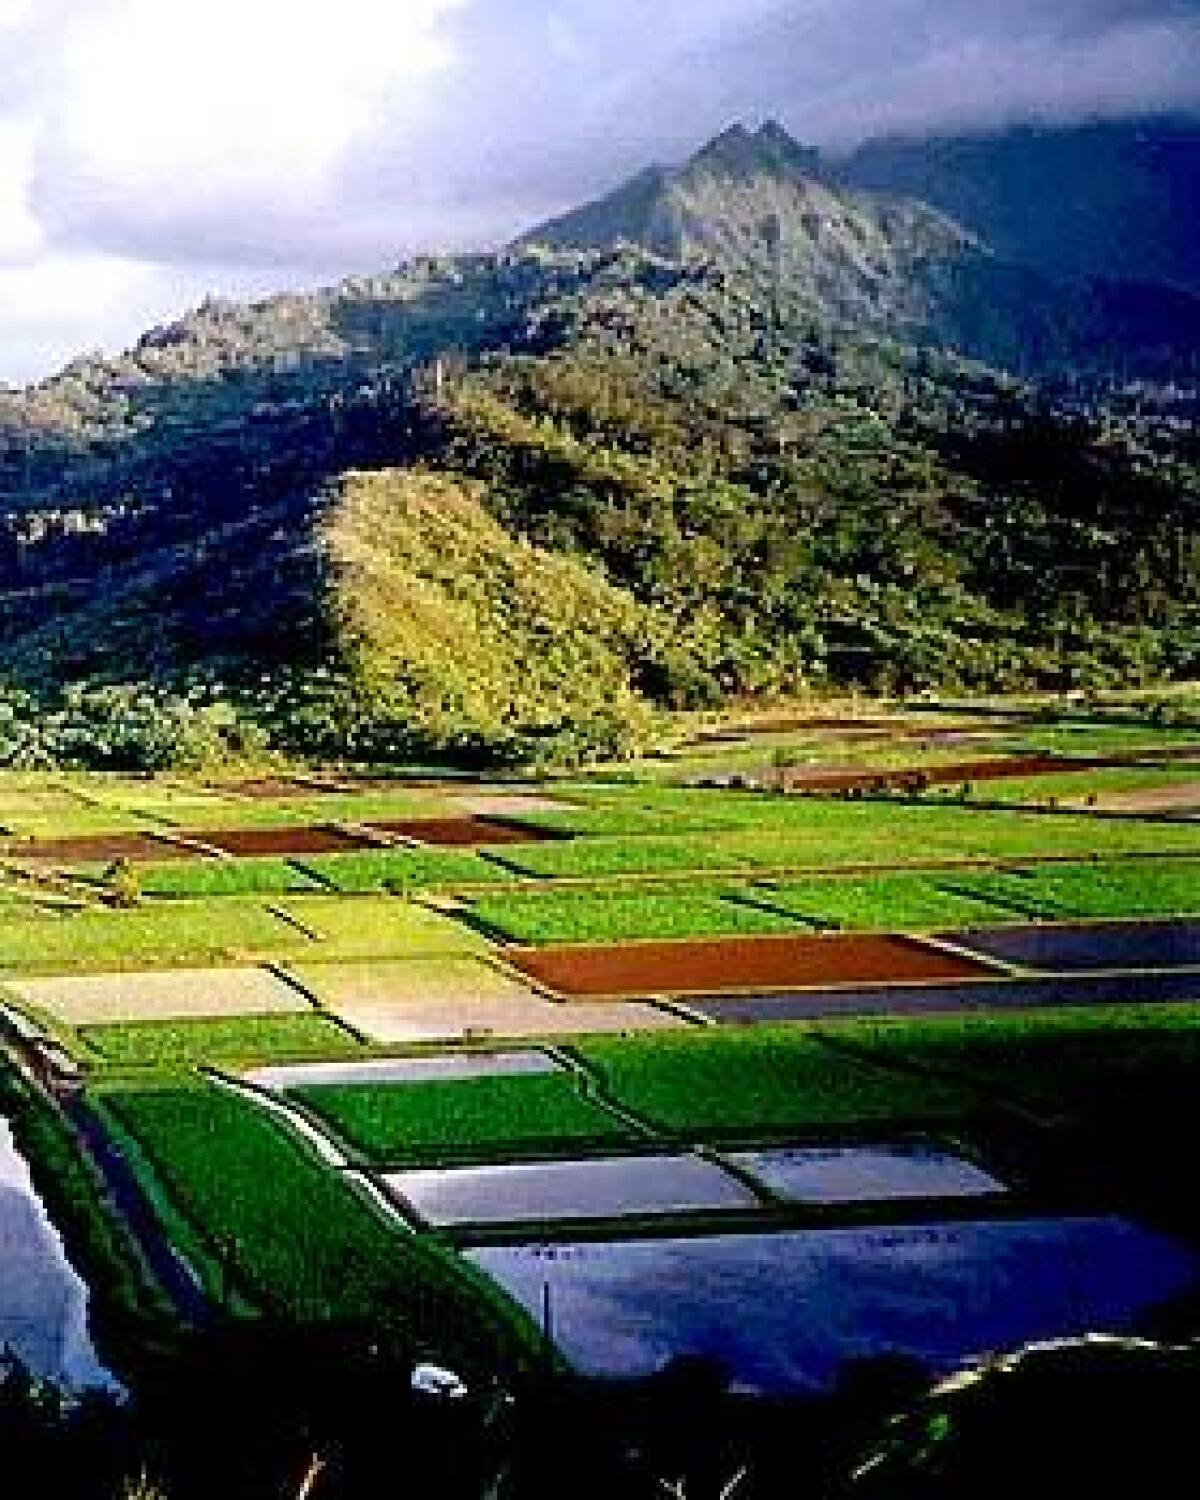 Taro, the source of poi, grows in Kauai's Hanalei Valley, said to be the birthplace of the rainbow.